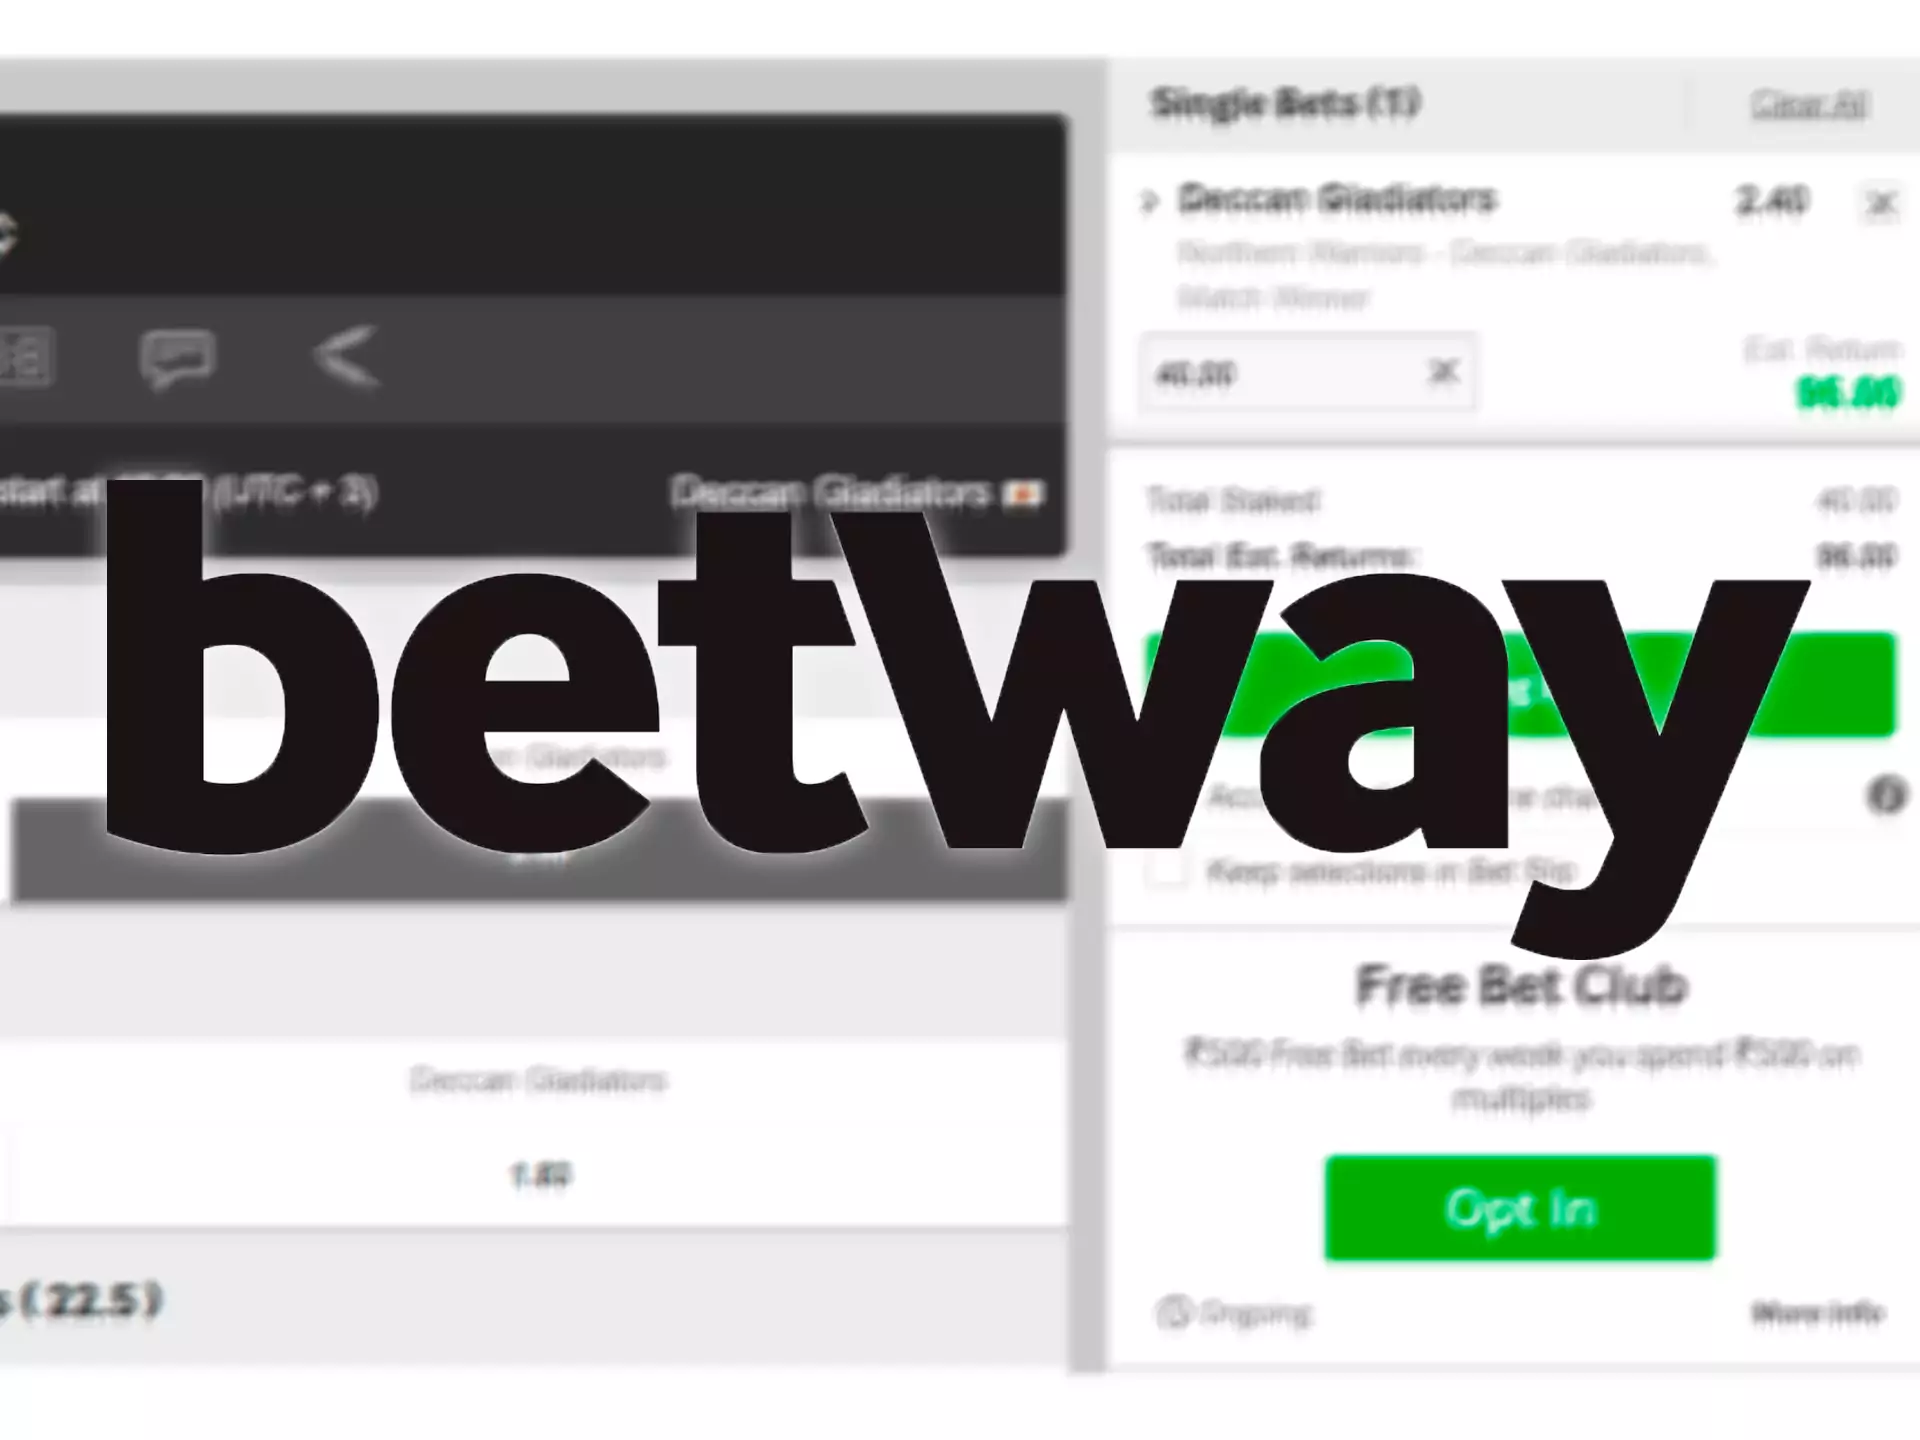 It's believed that Betway has the best mobile app to bet on cricket.